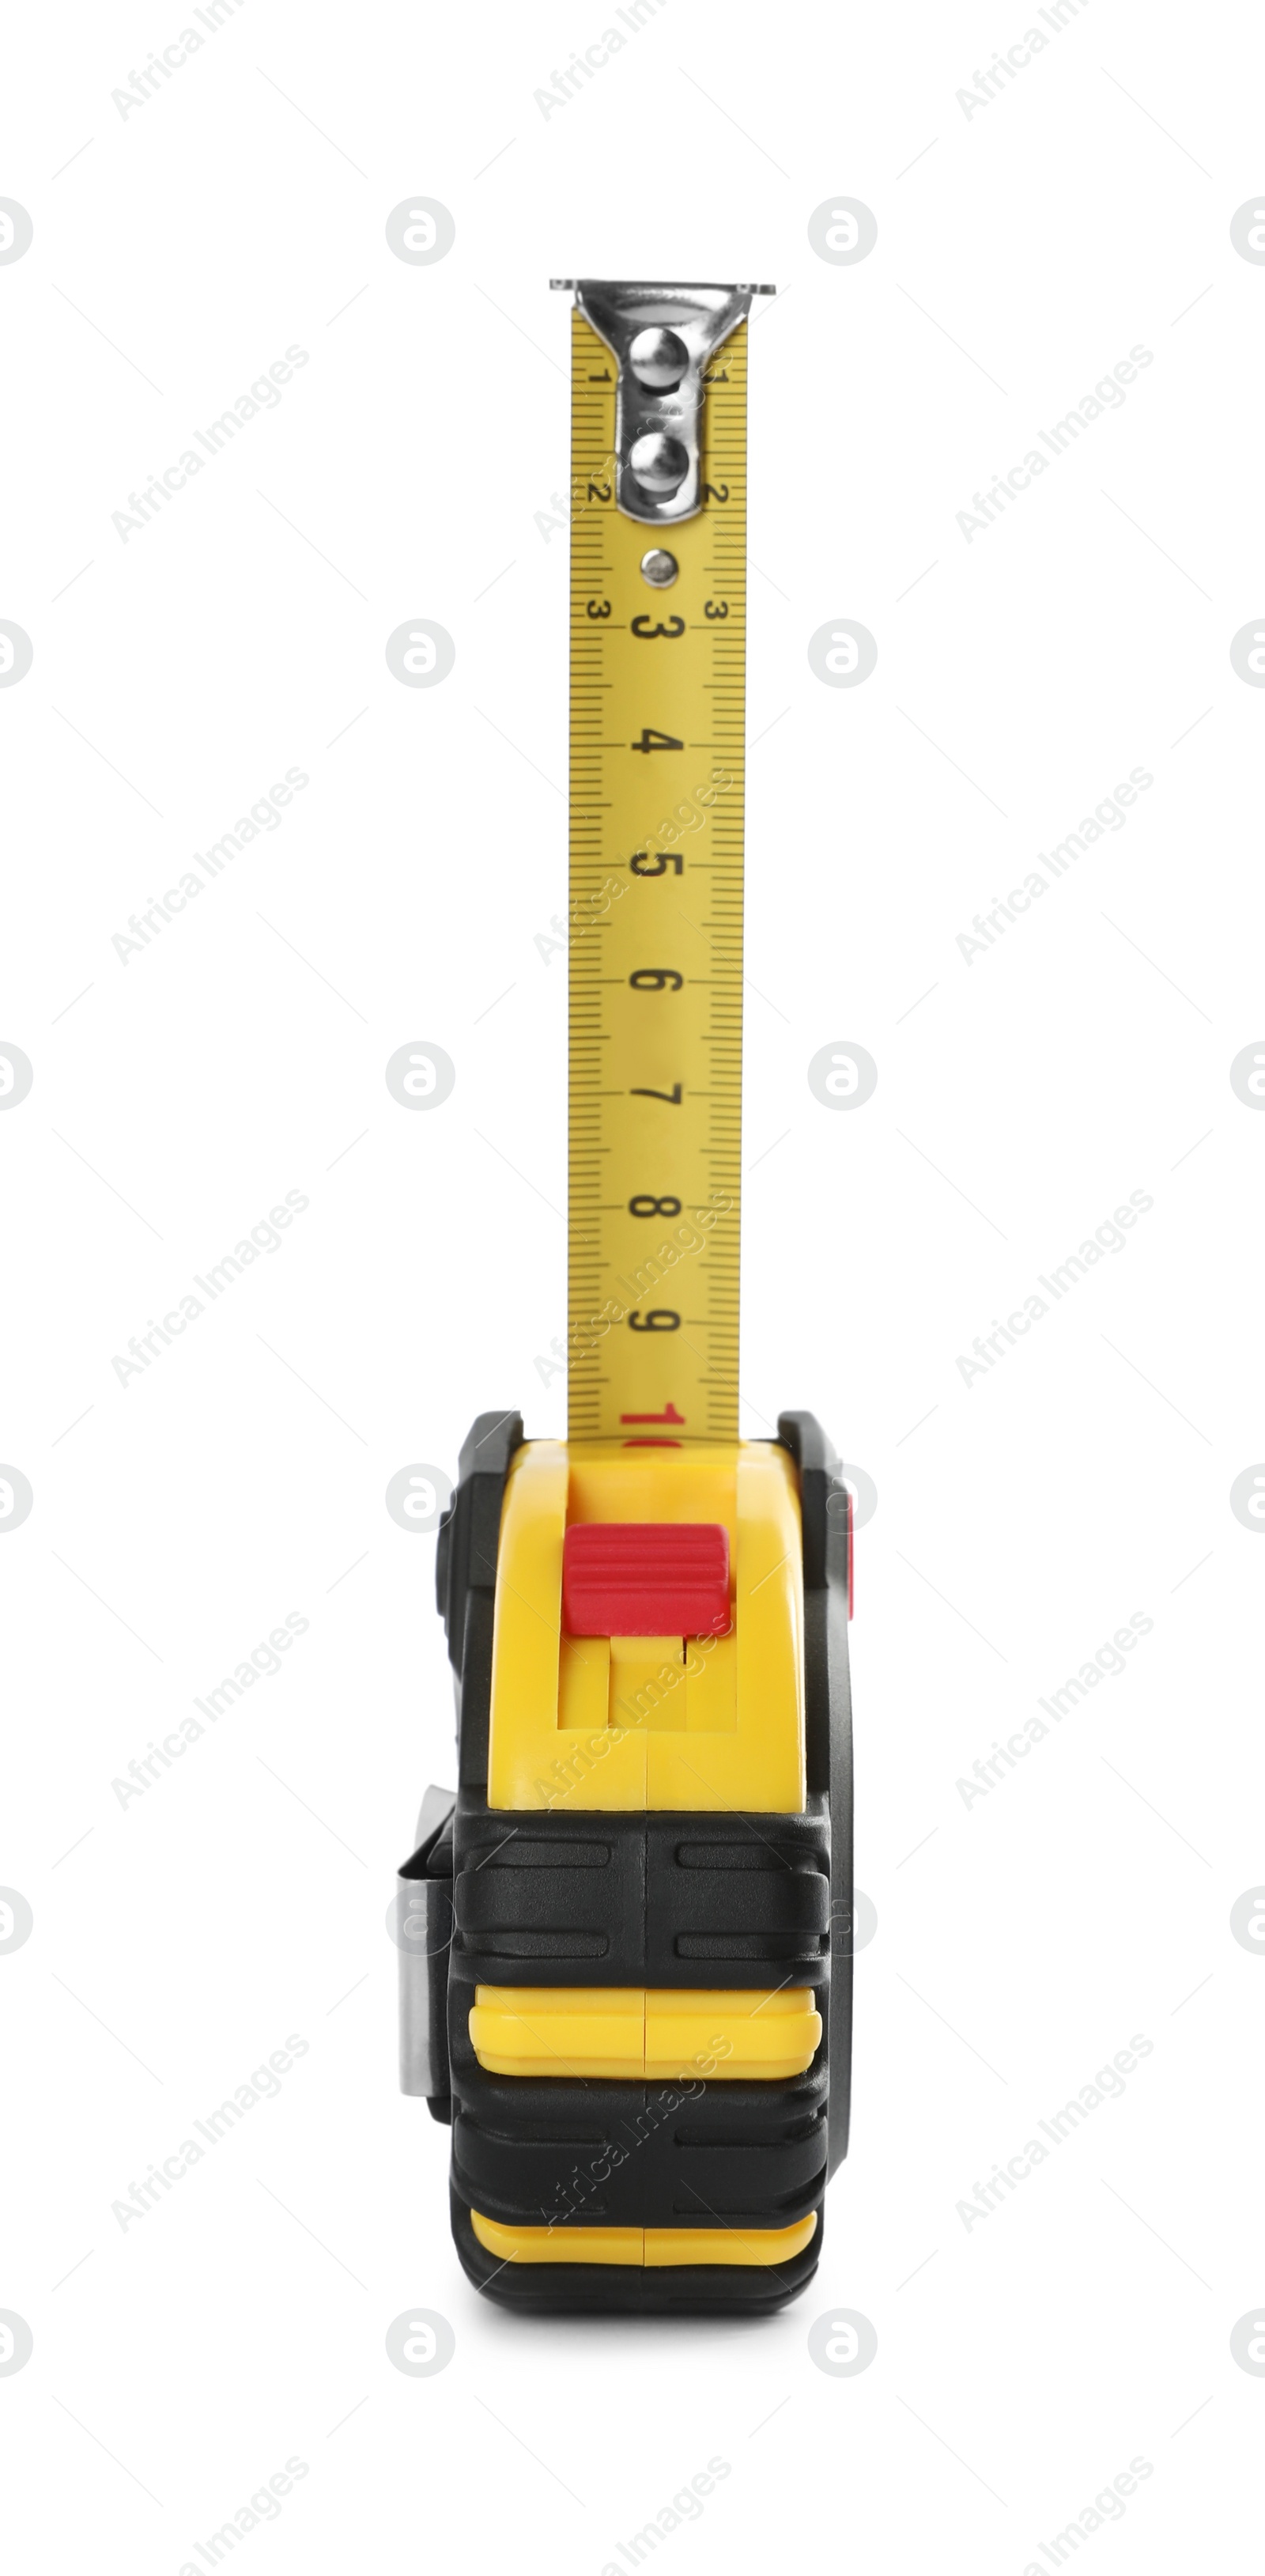 Photo of Tape measure isolated on white. Construction tool